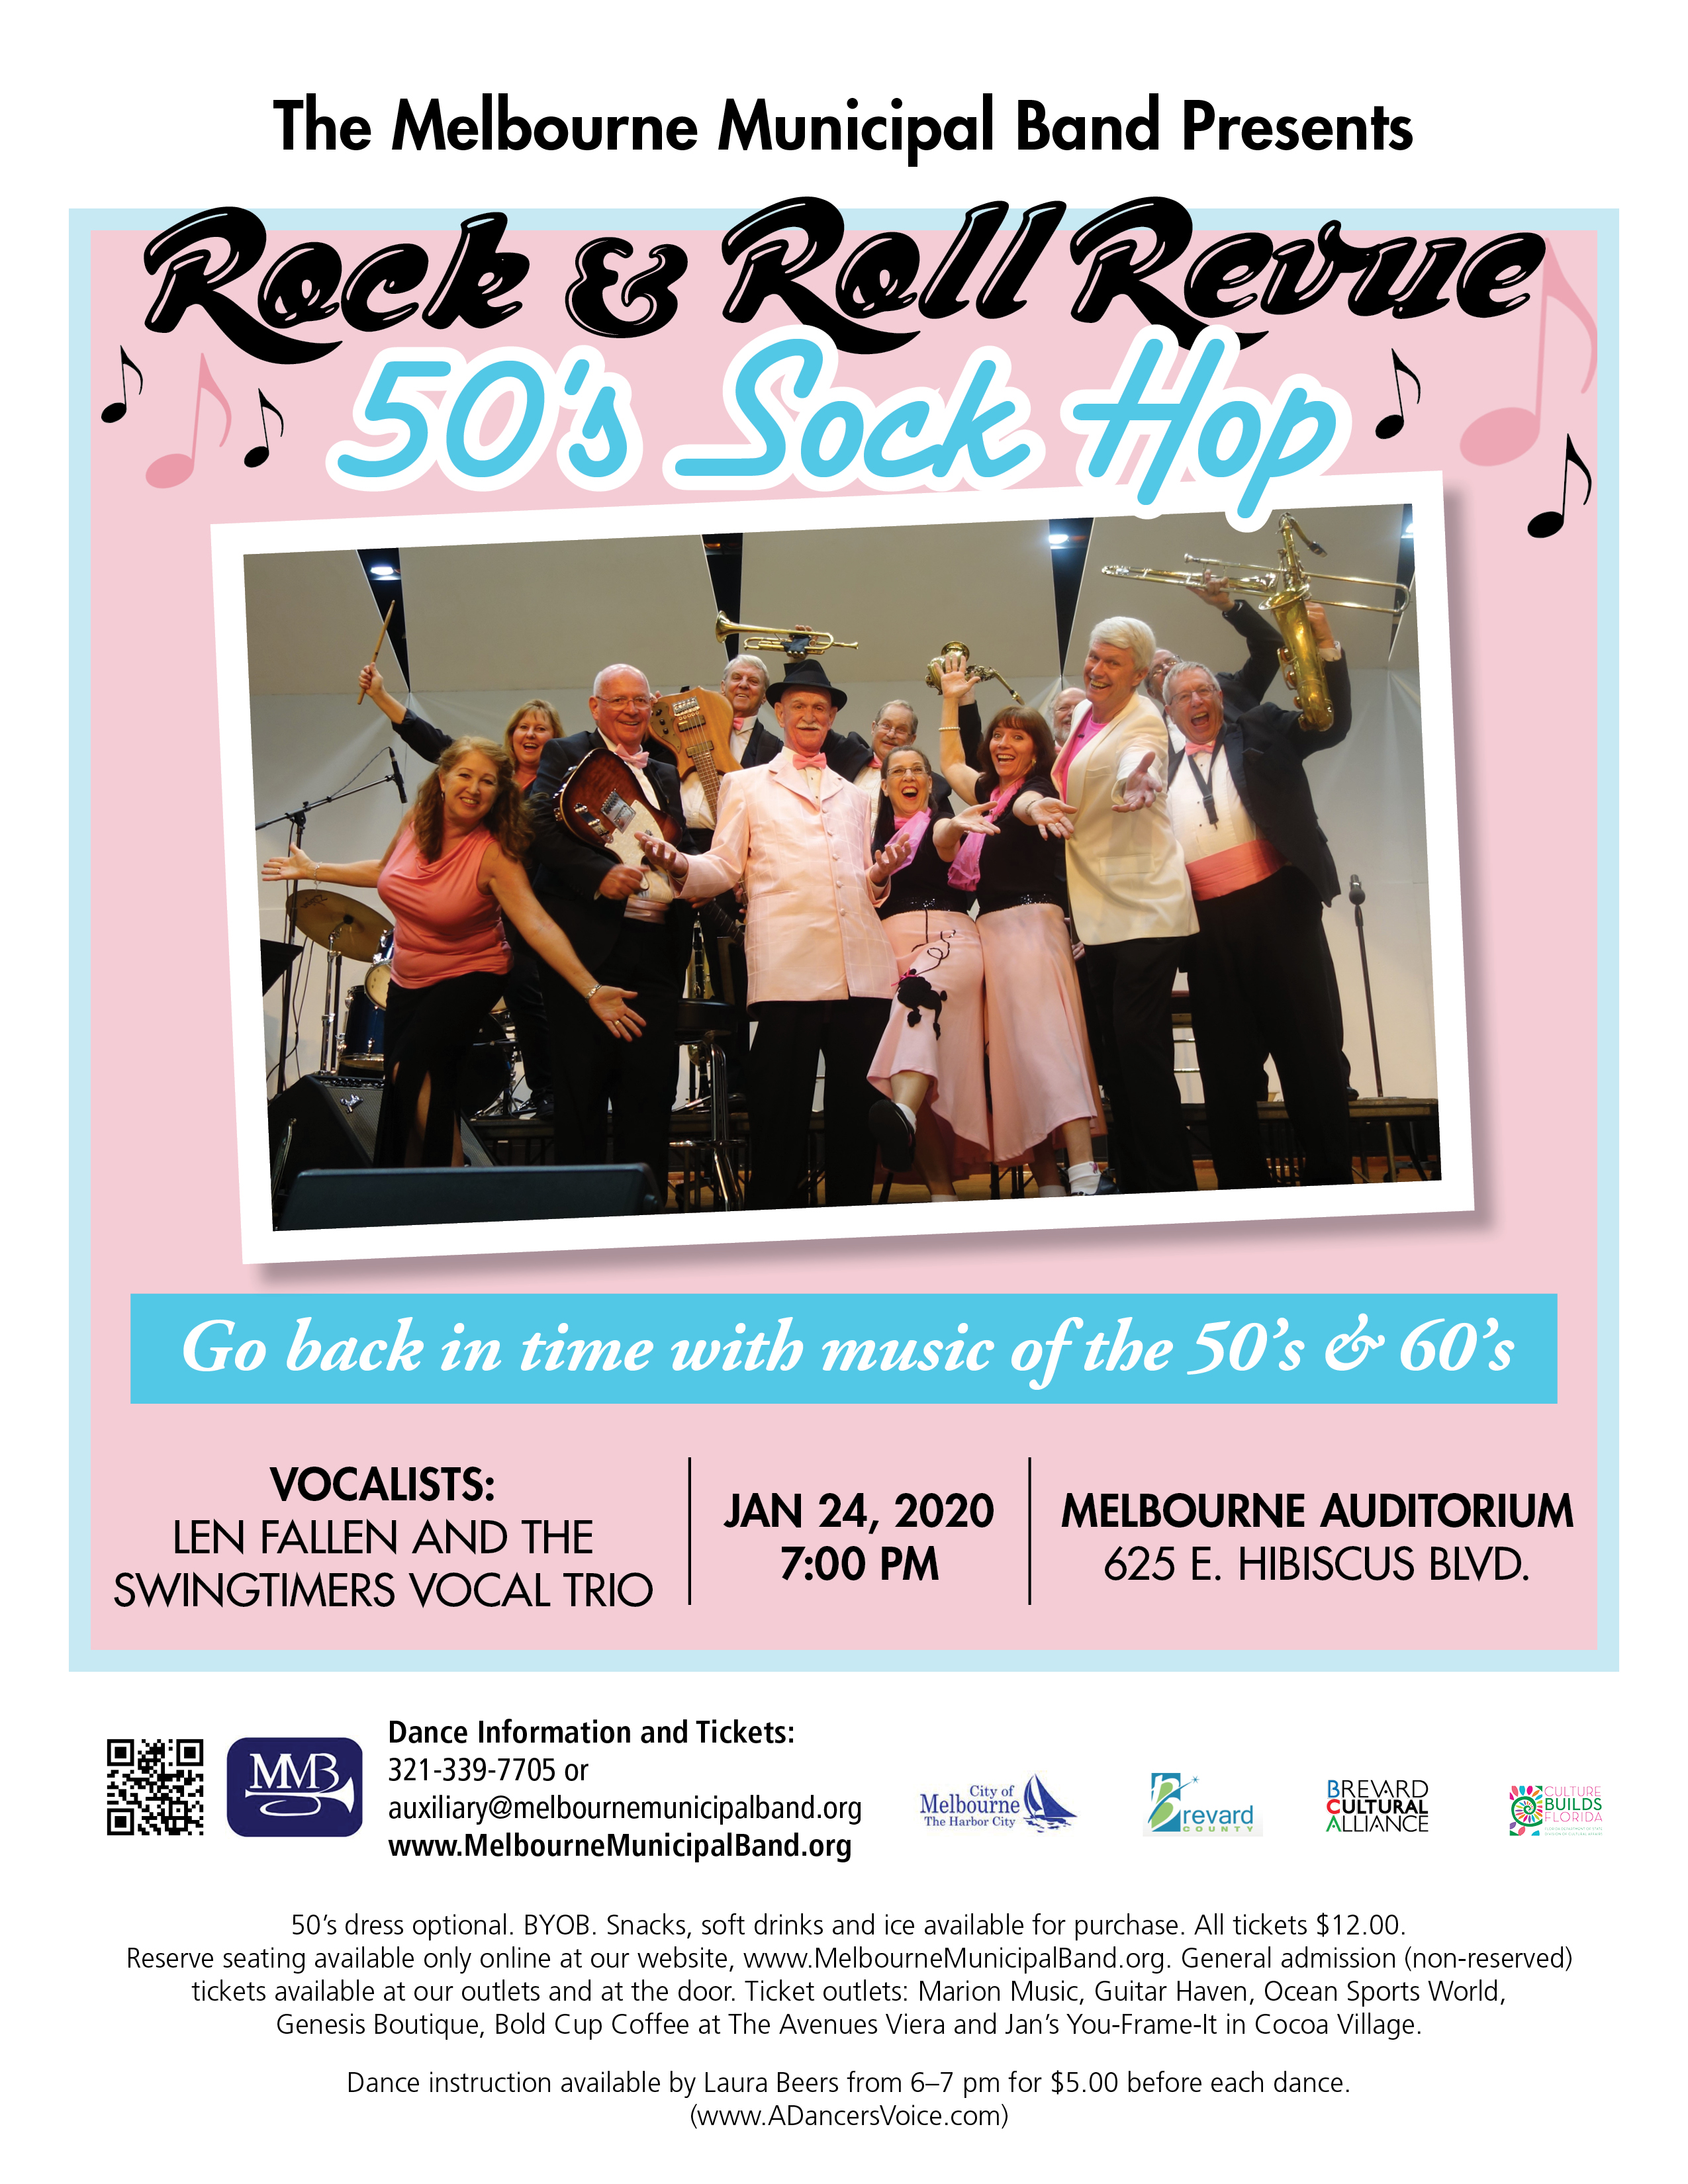 Rock & Roll Revue 50's Sock Hop presented by The Melbourne Municipal Band